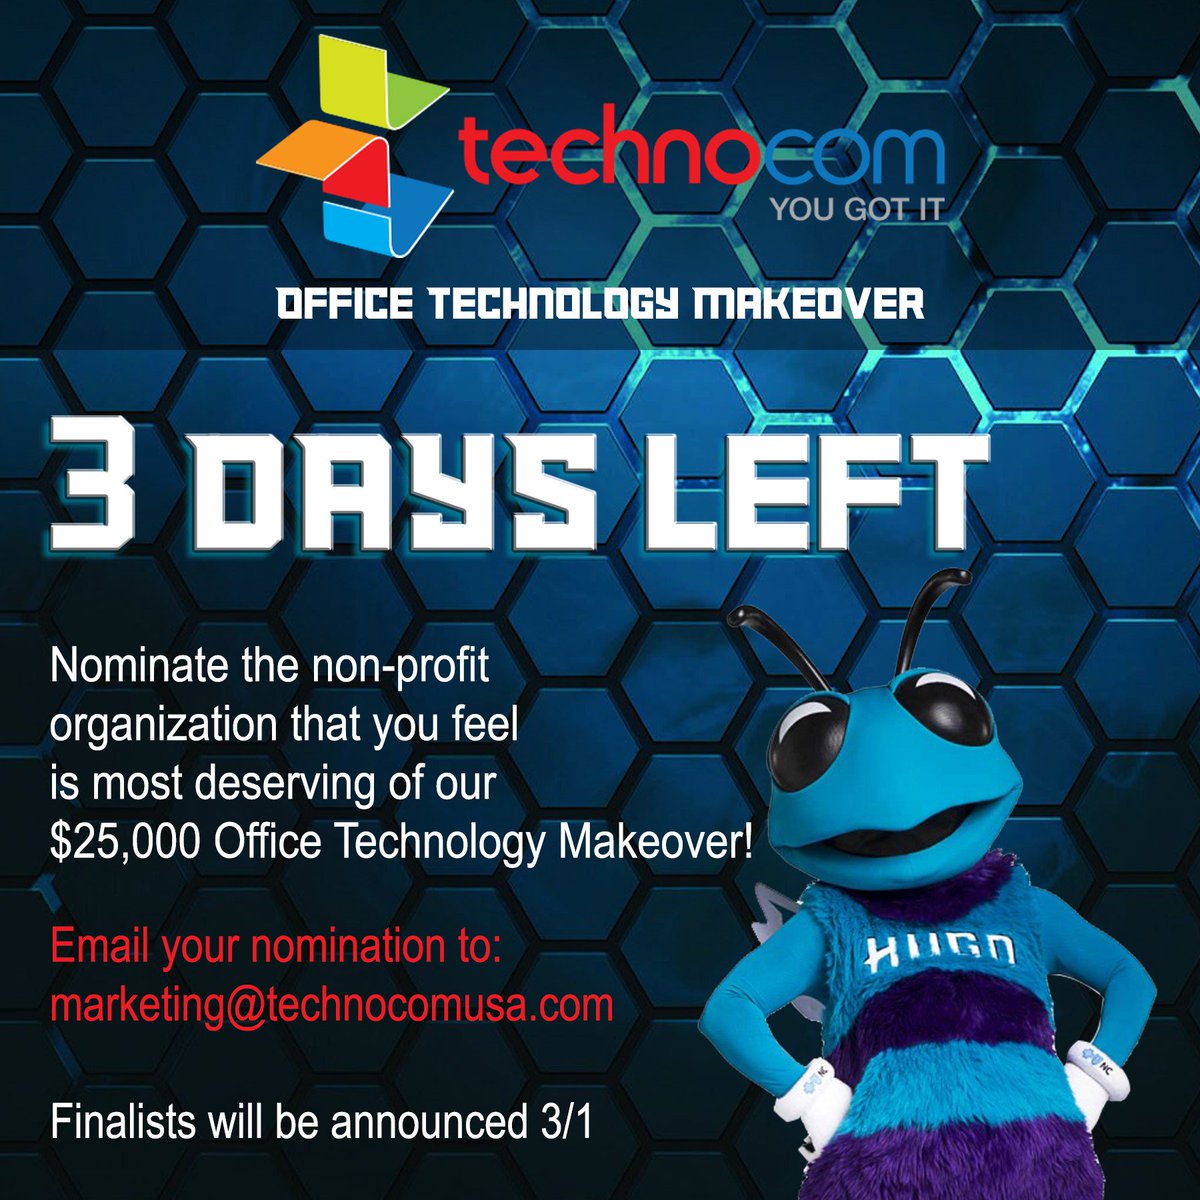 There’s still time to send your nomination for the most deserving #nonprofit to be entered for a chance to win our $25,000 Office #TechnologyMakeover! Send your nomination to marketing@technocomusa.com. Finalists will be announced March 1st. Voting begins March 5th! #YouGotIt